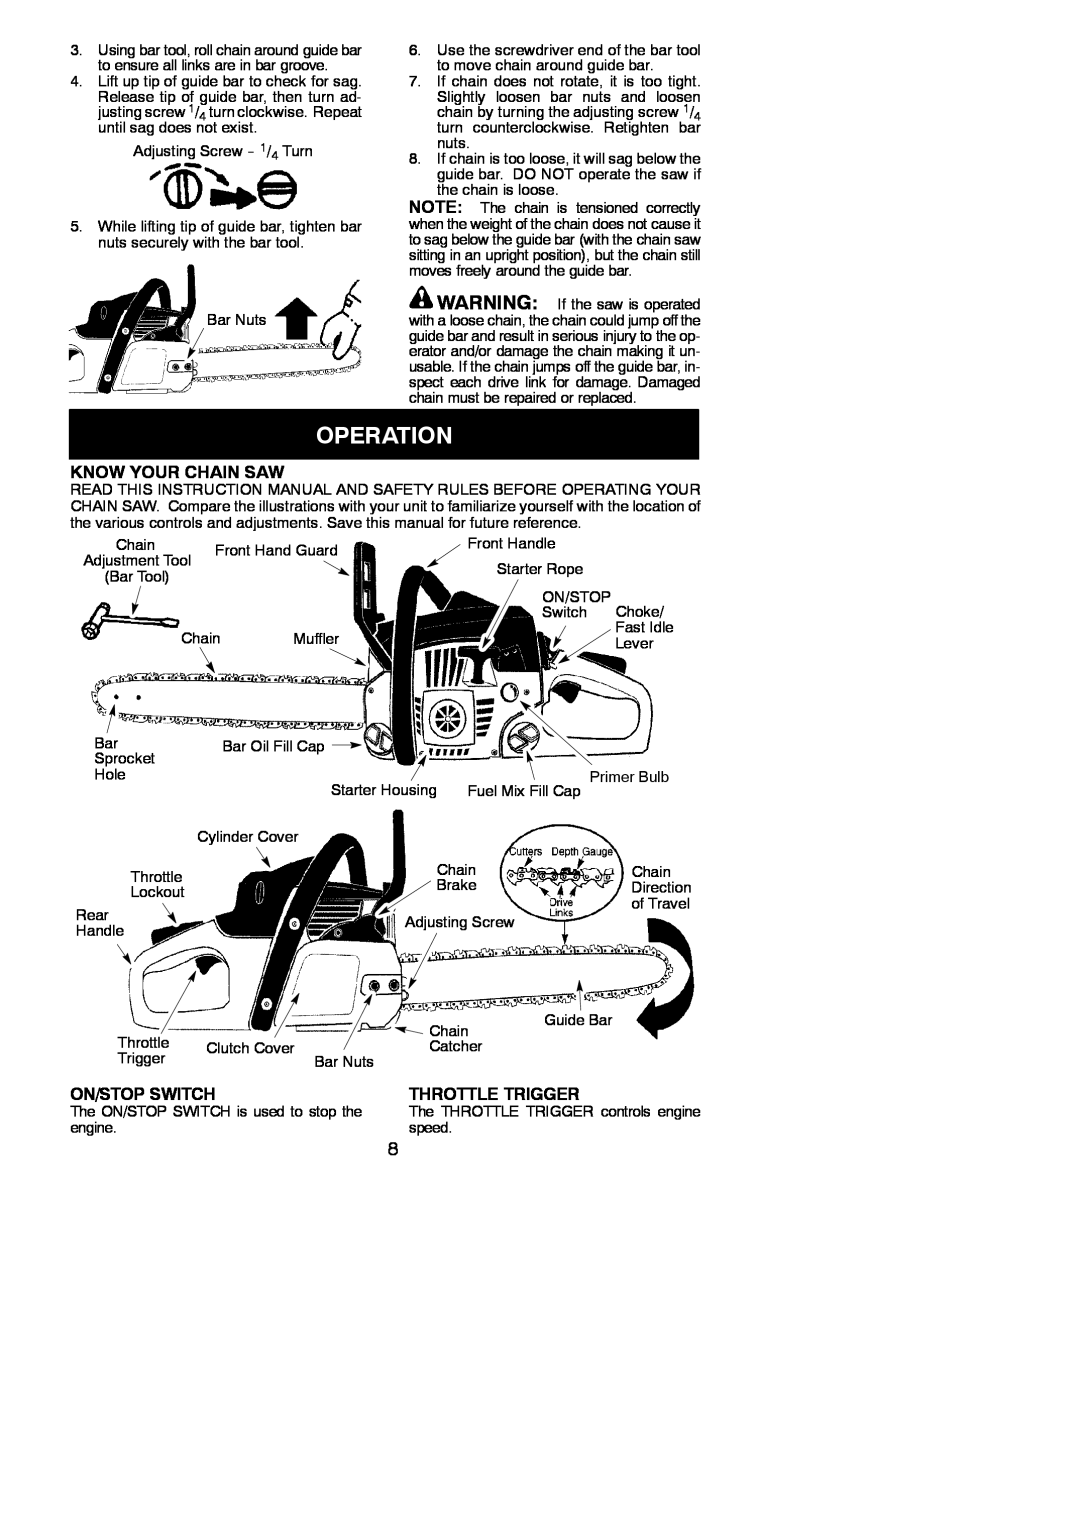 McCulloch 576600401, 966625201, MC3516 instruction manual Operation, Know Your Chain Saw, On/Stop Switch, Throttle Trigger 